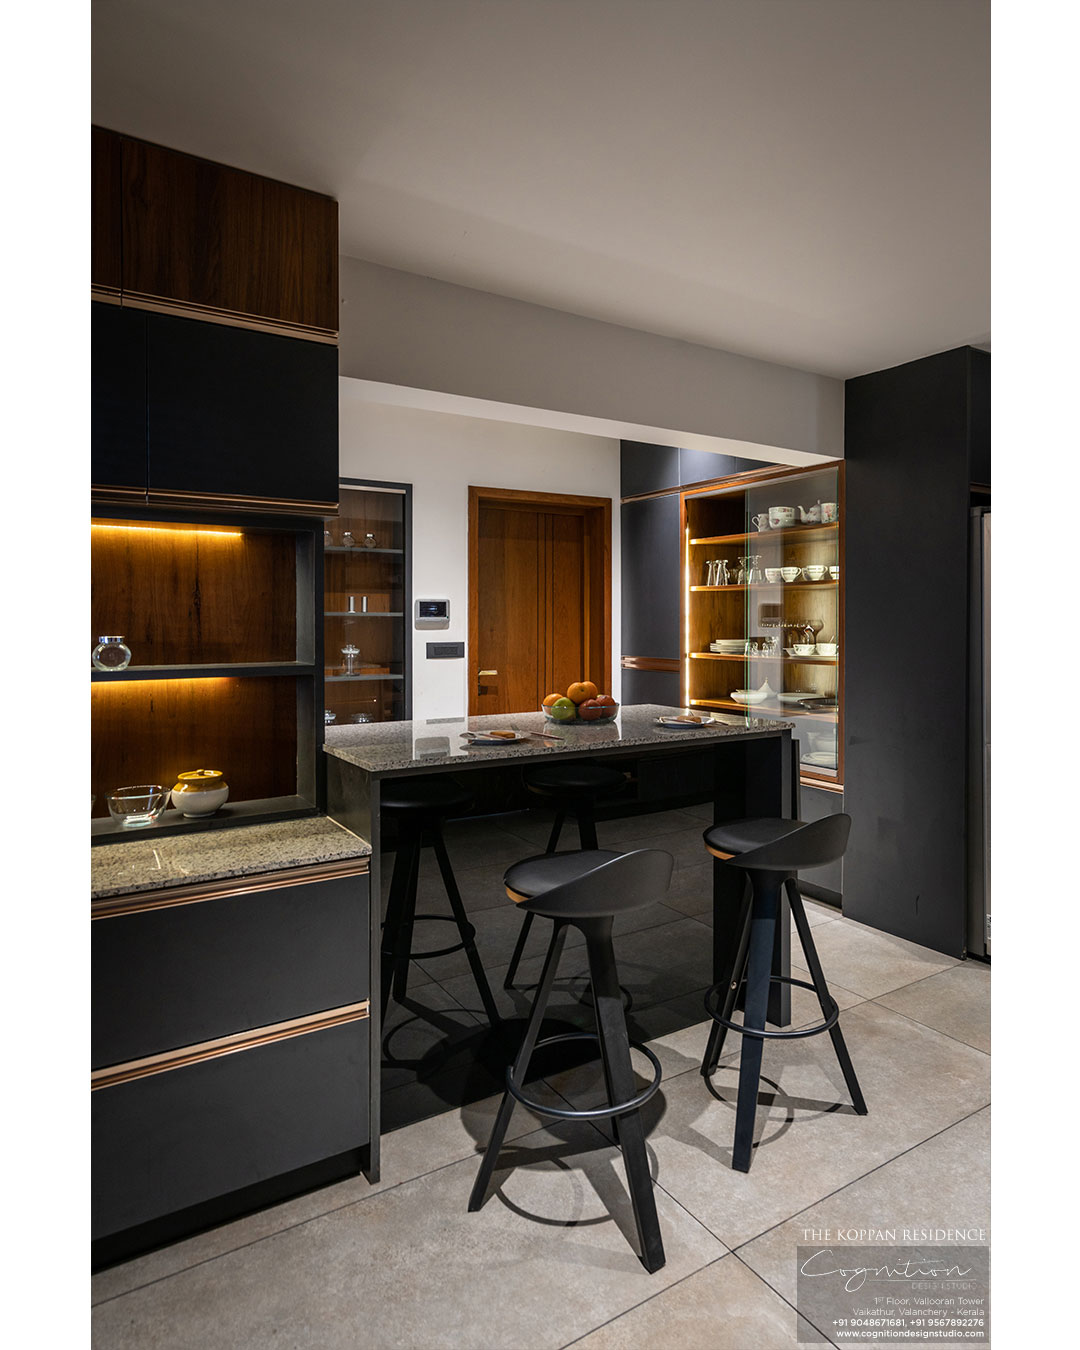 The Kitchen with black, wood and rose gold as finishes.